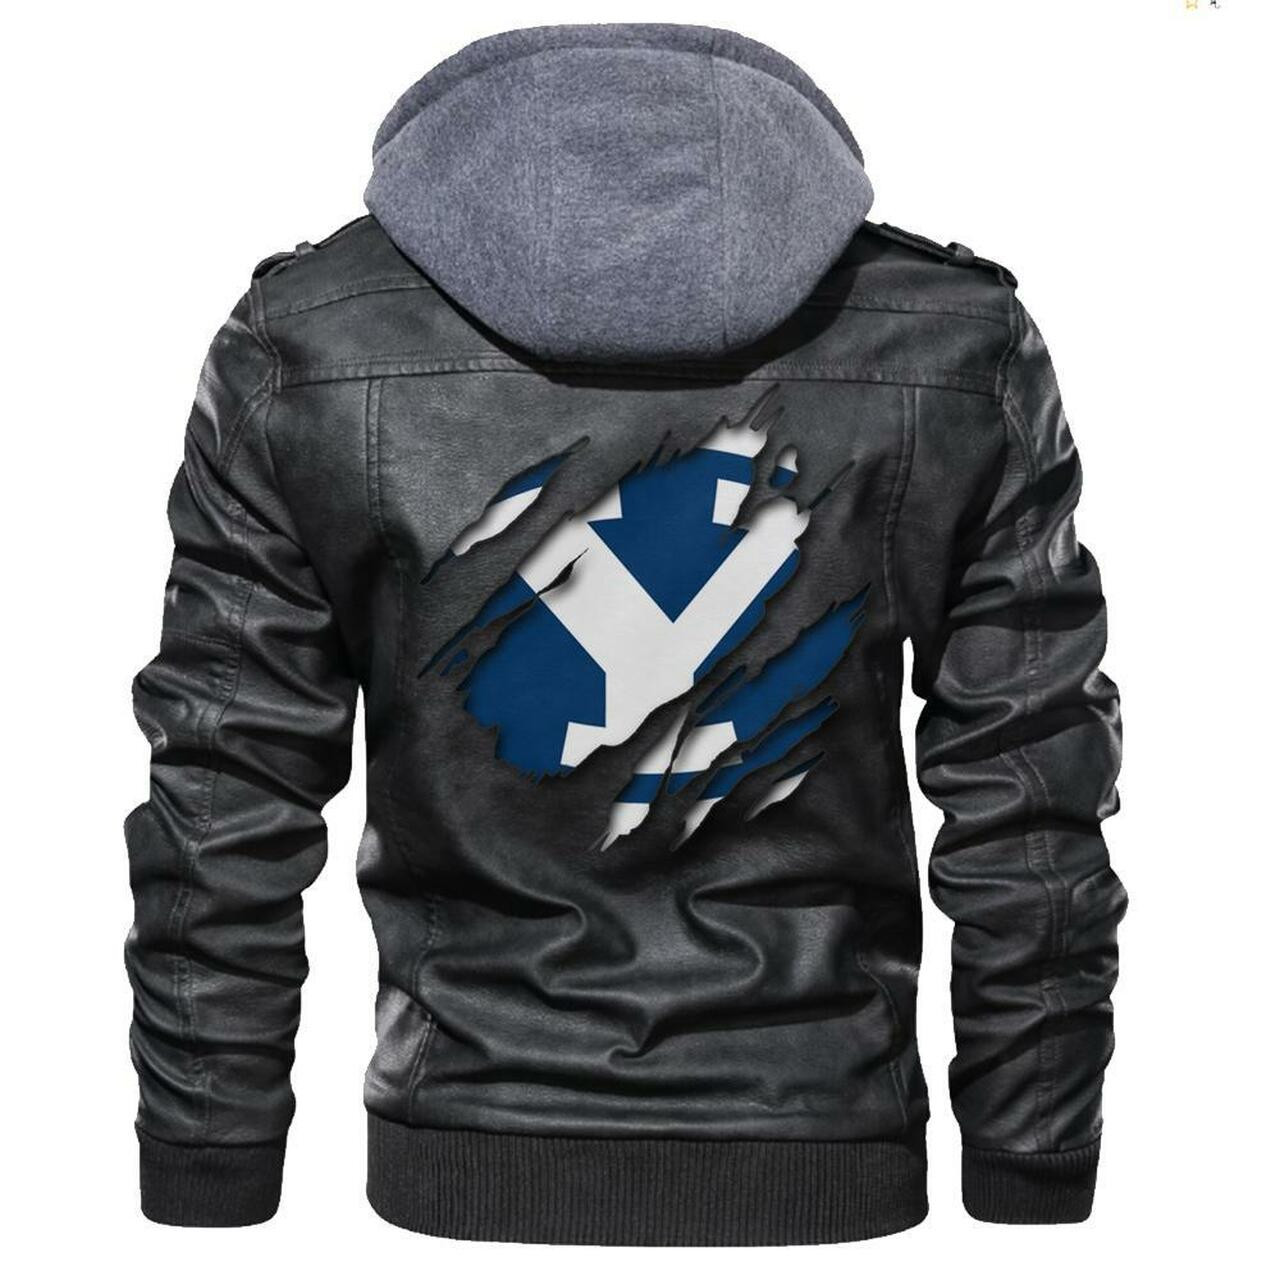 You can find Leather Jacket online at a great price 162